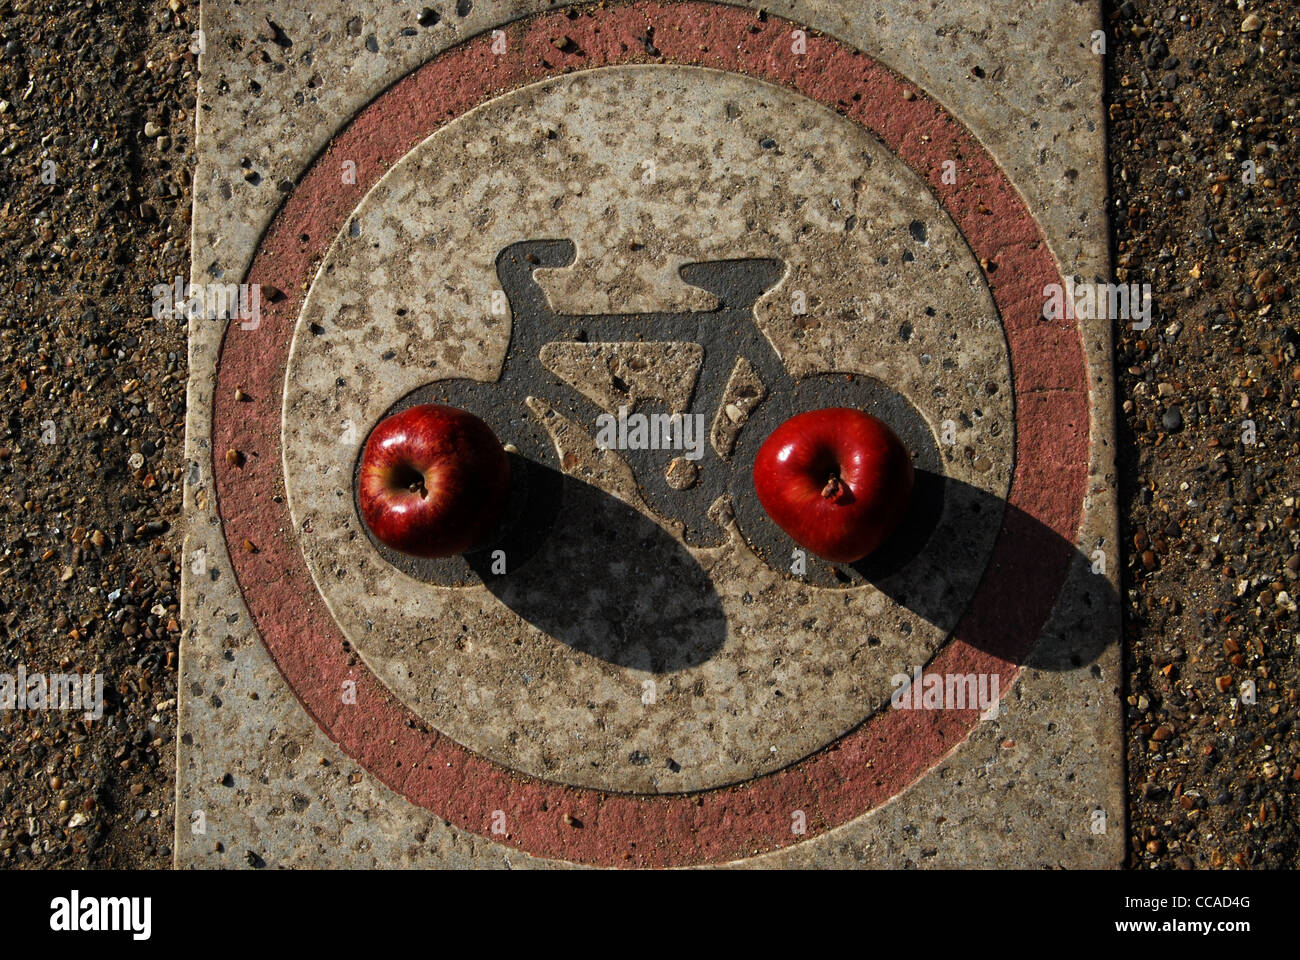 The Traveling Apples - Apples like circles Stock Photo